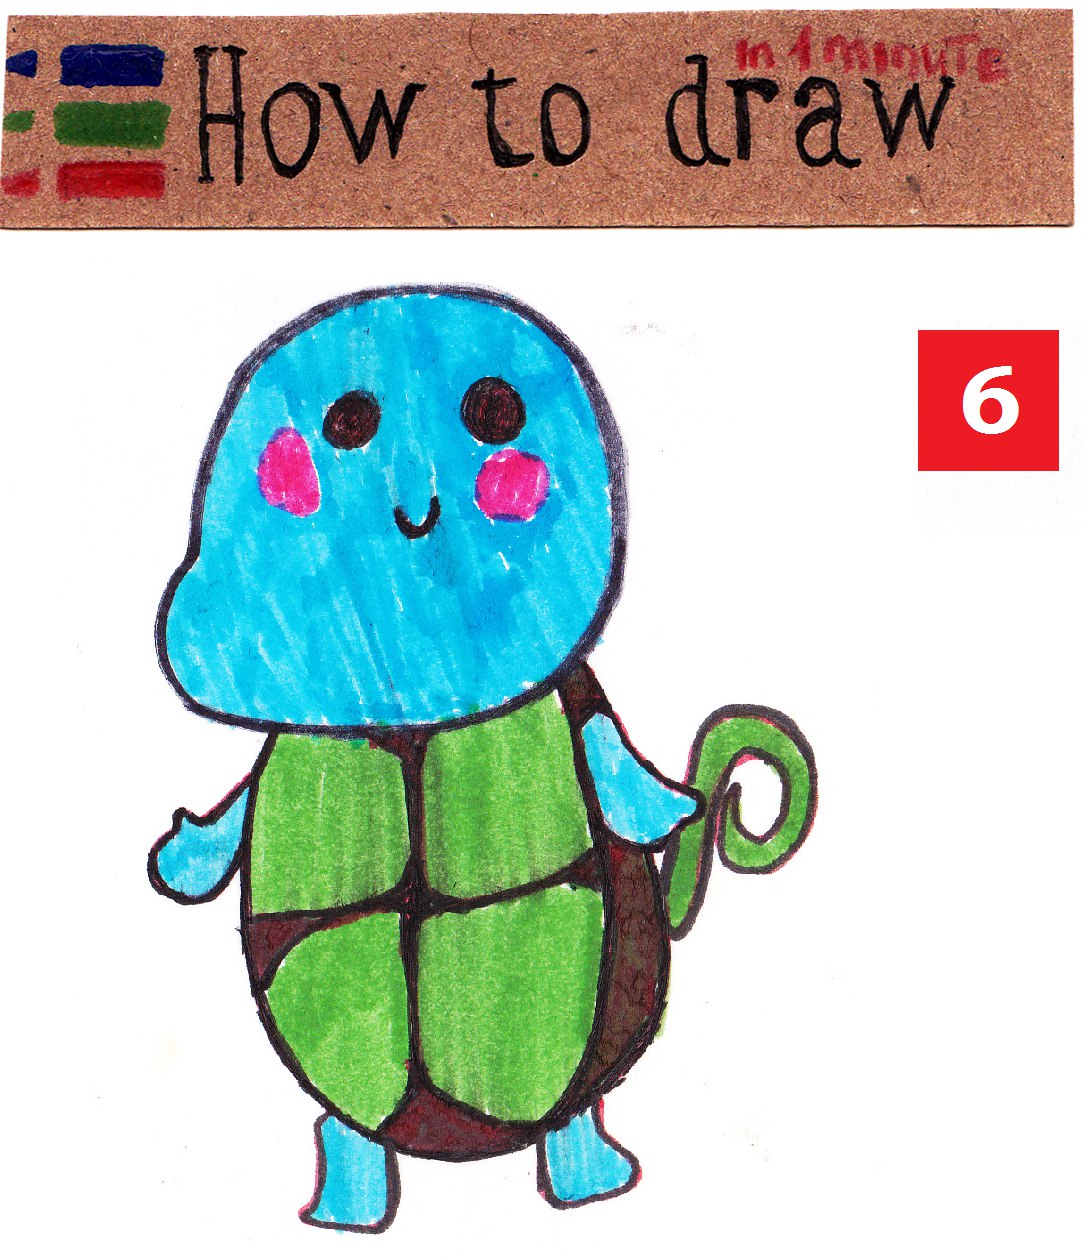 How to draw cute Pokemon Squirtle step by step